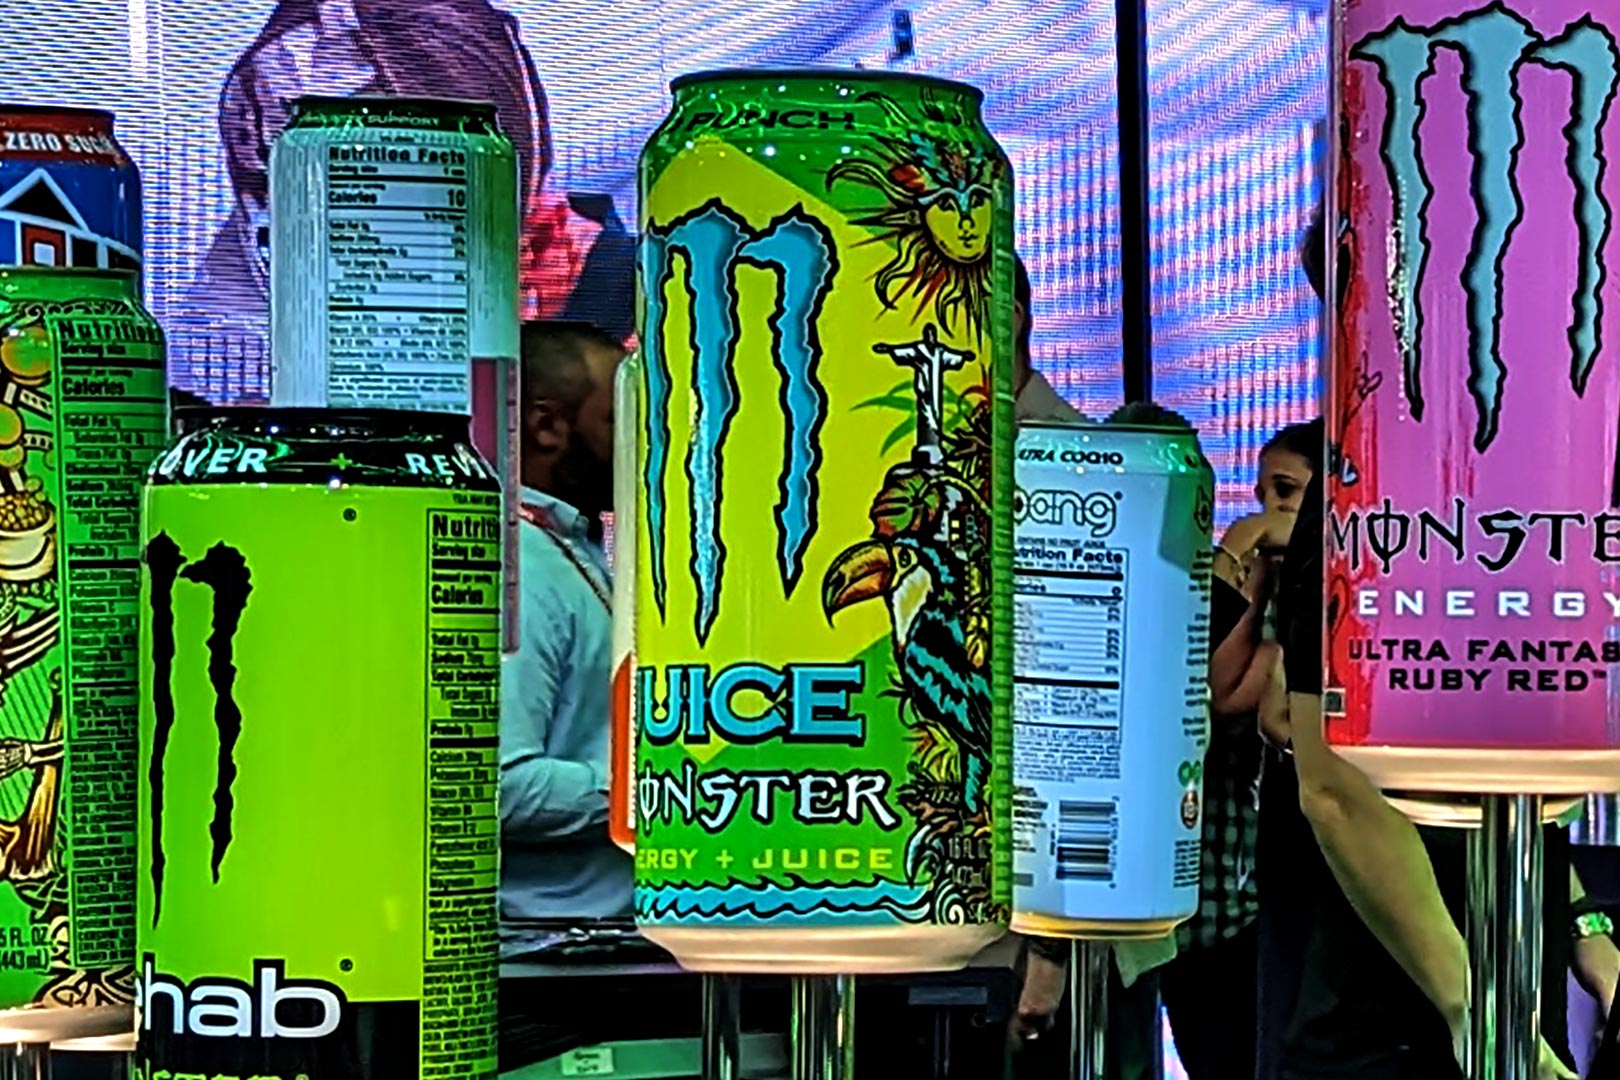 Rio Punch Monster Juice Energy Drink